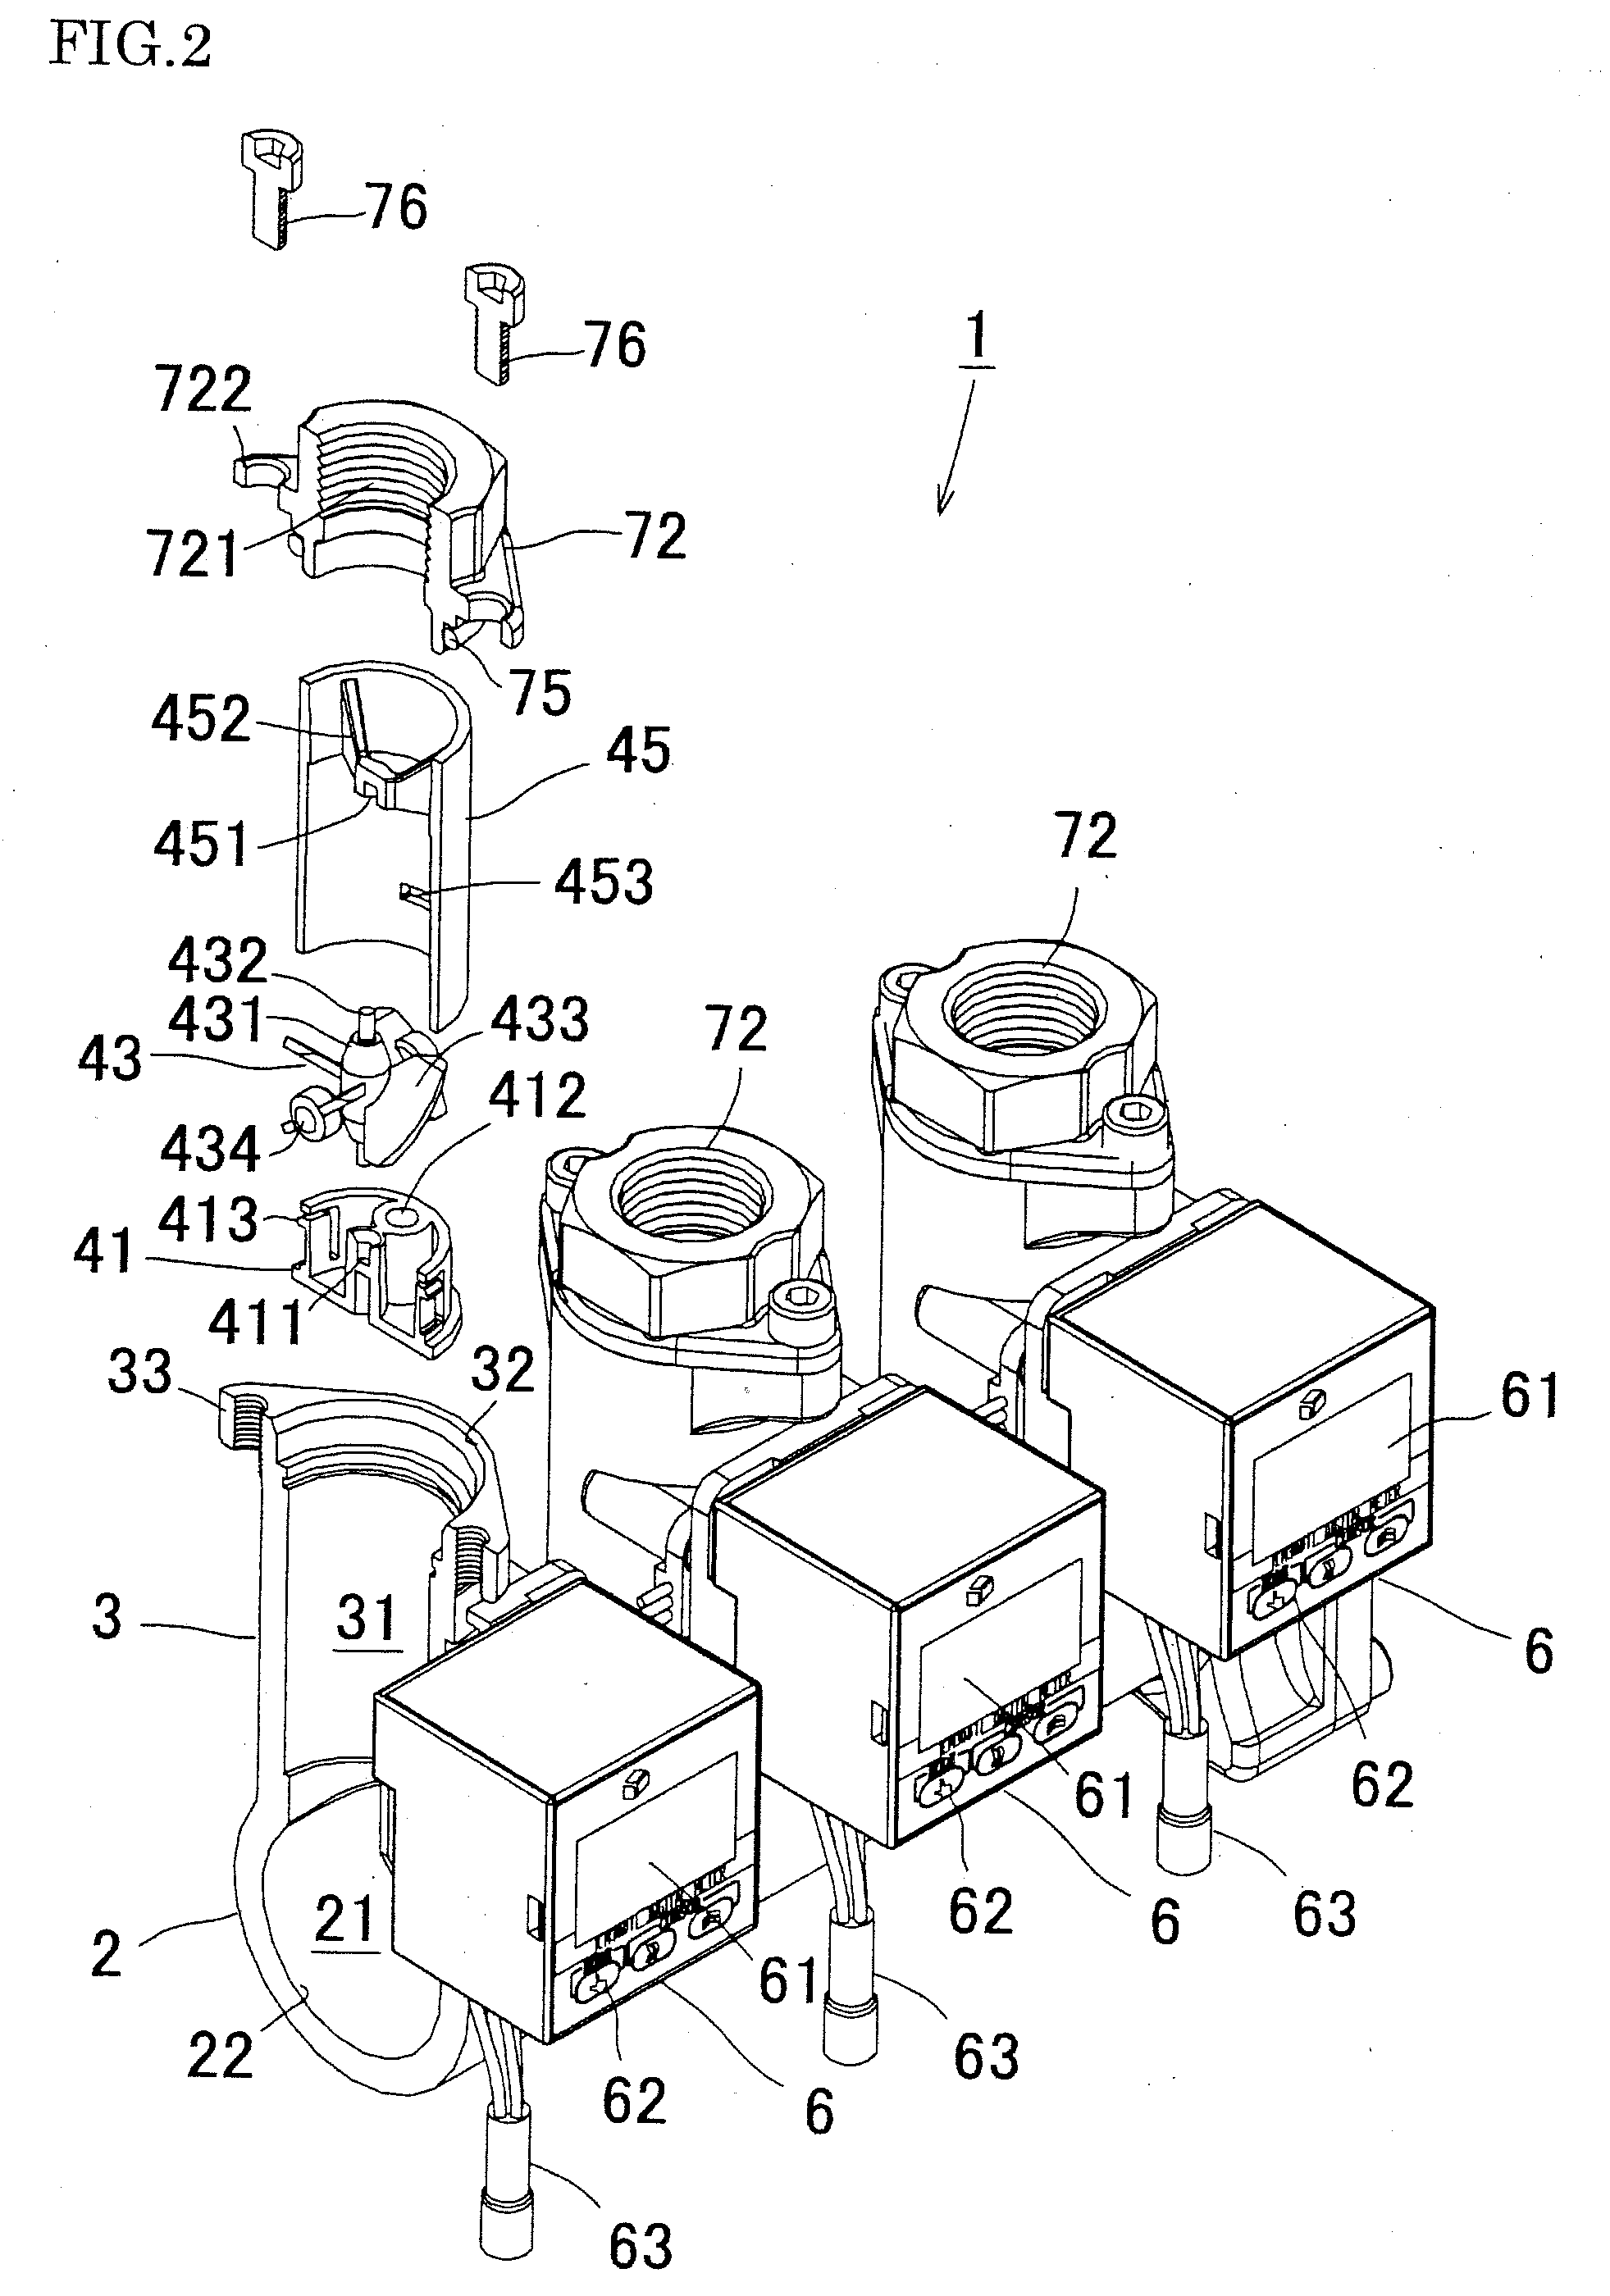 Pipe Assembly Unit With Built-In Flow Sensors